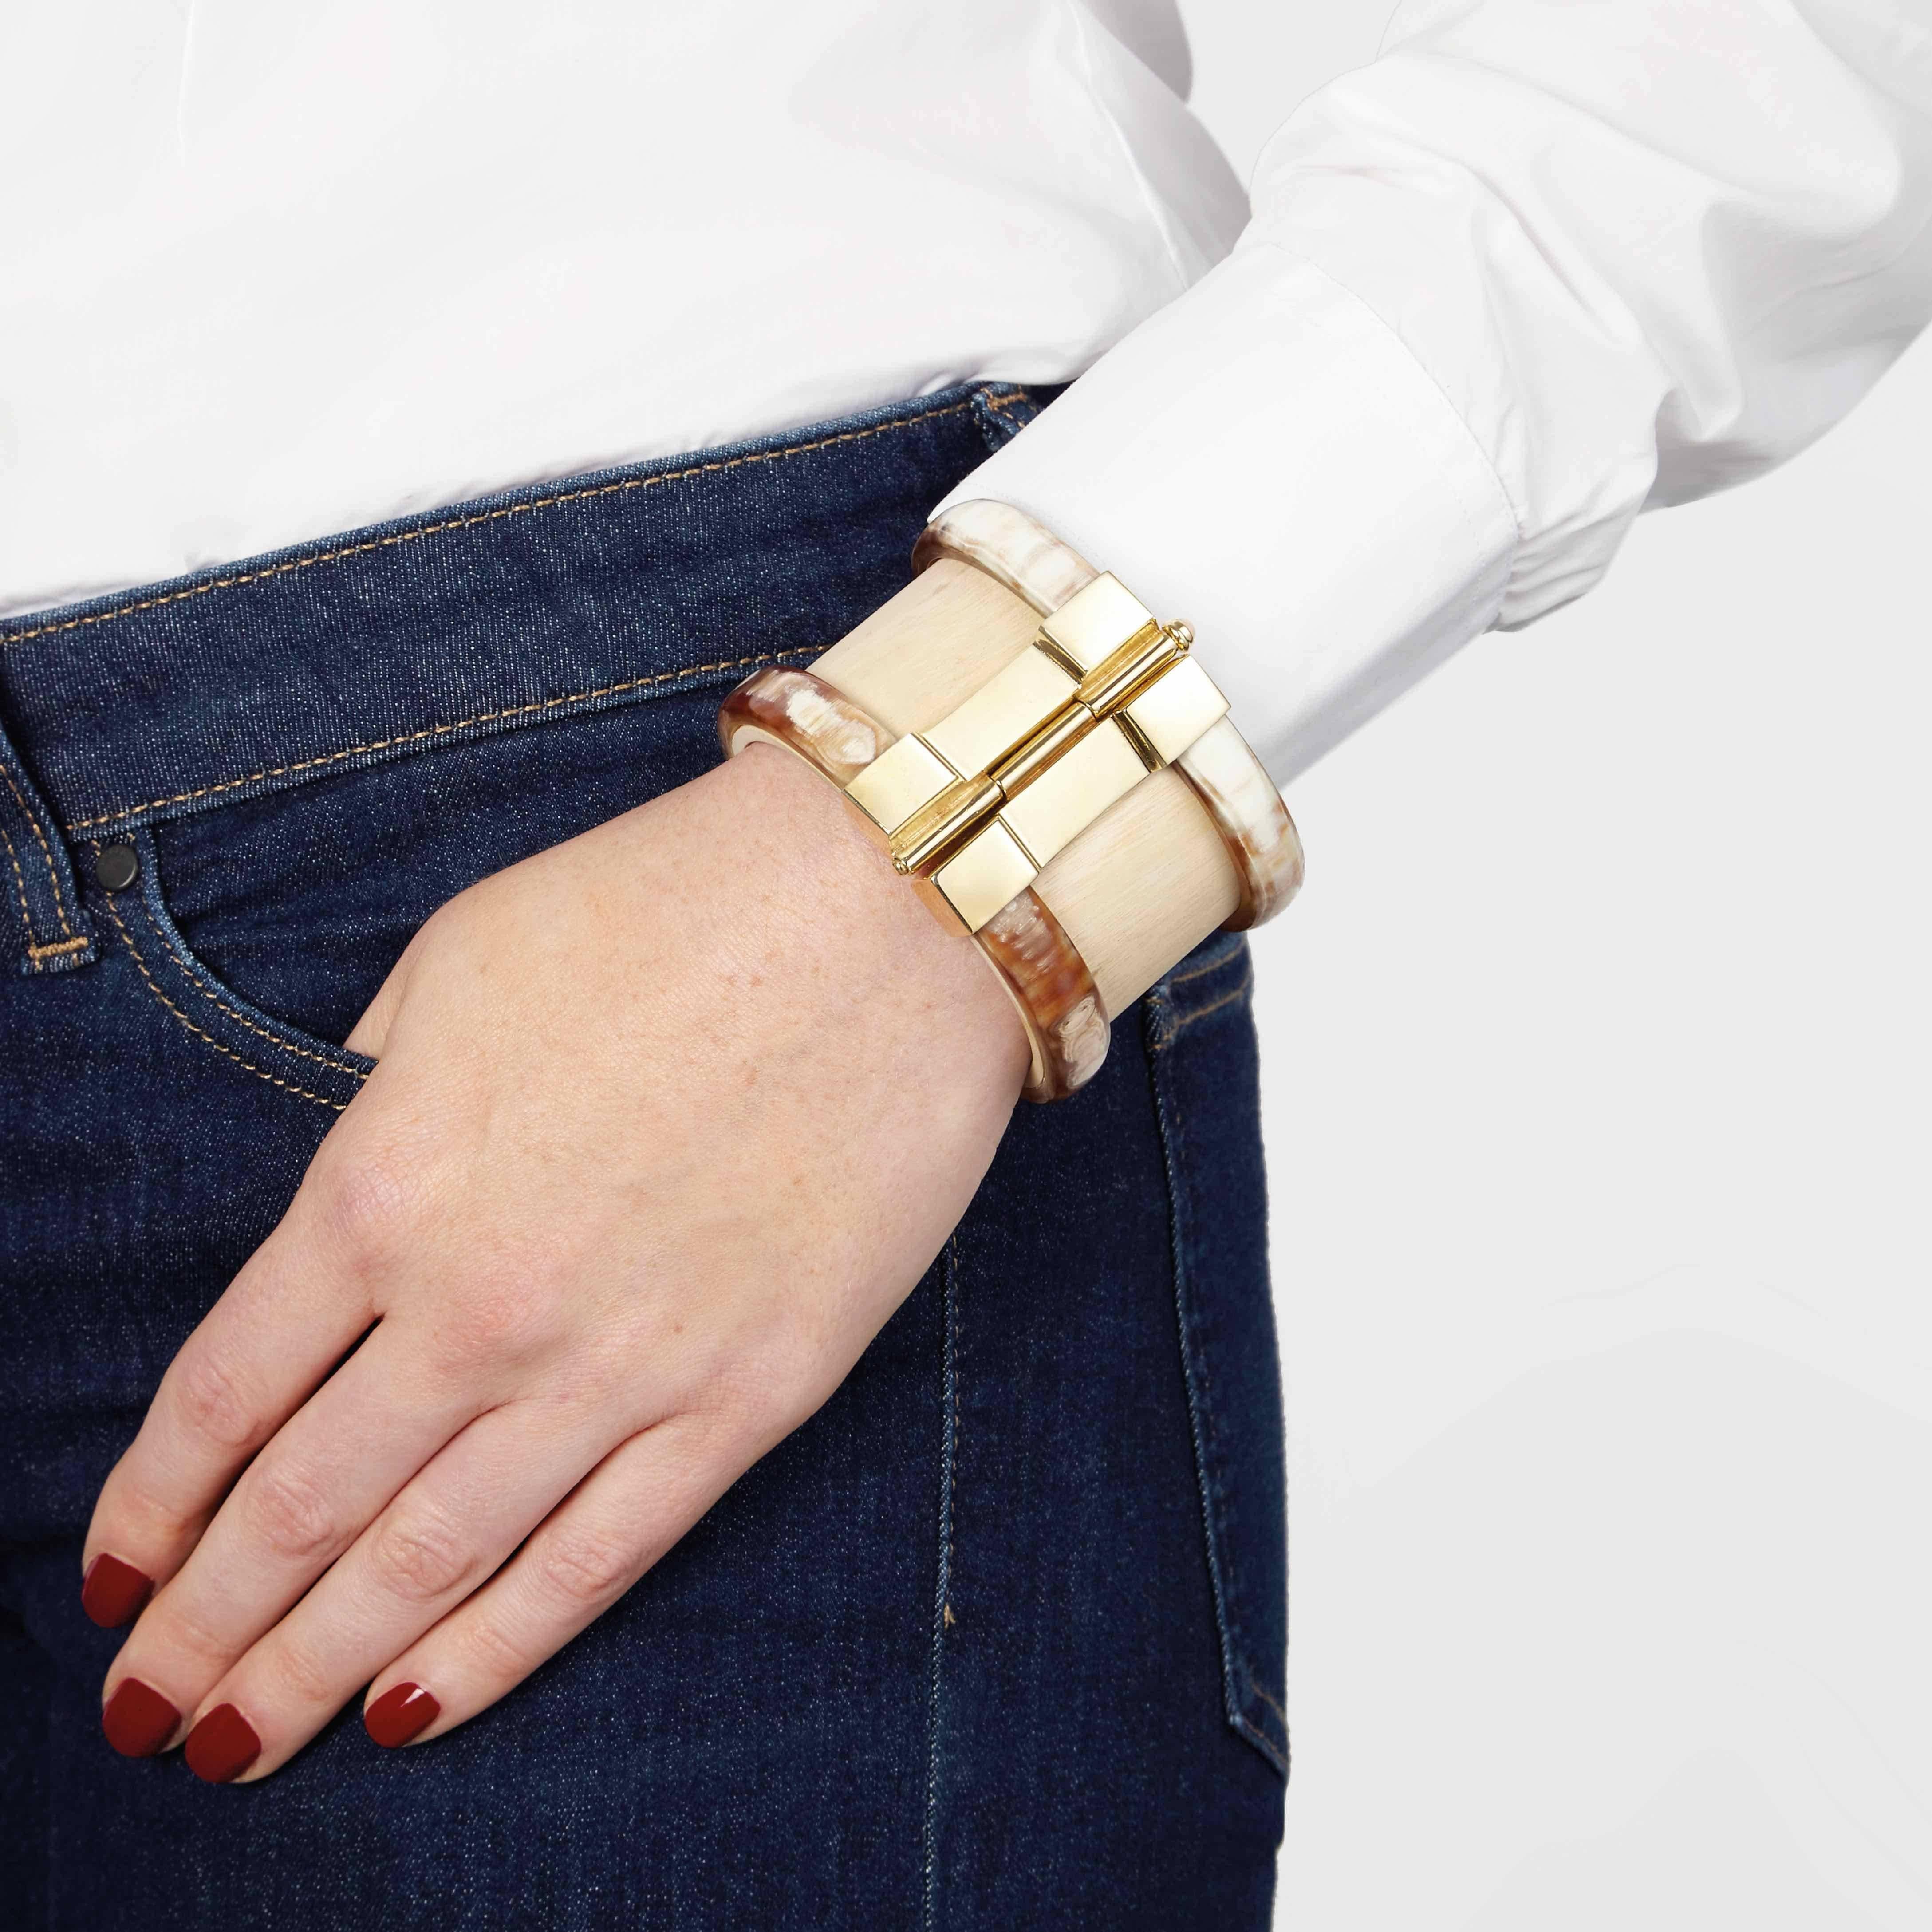 Cuff bracelet crafted by hand from jacaranda wood and African cow horn. The 18k gold plate pin-clasp is set with a fire-opal cabochon. 

Hand crafted by artisans in Kenya, East Africa and finished by hand to the finest quality in London; ready to